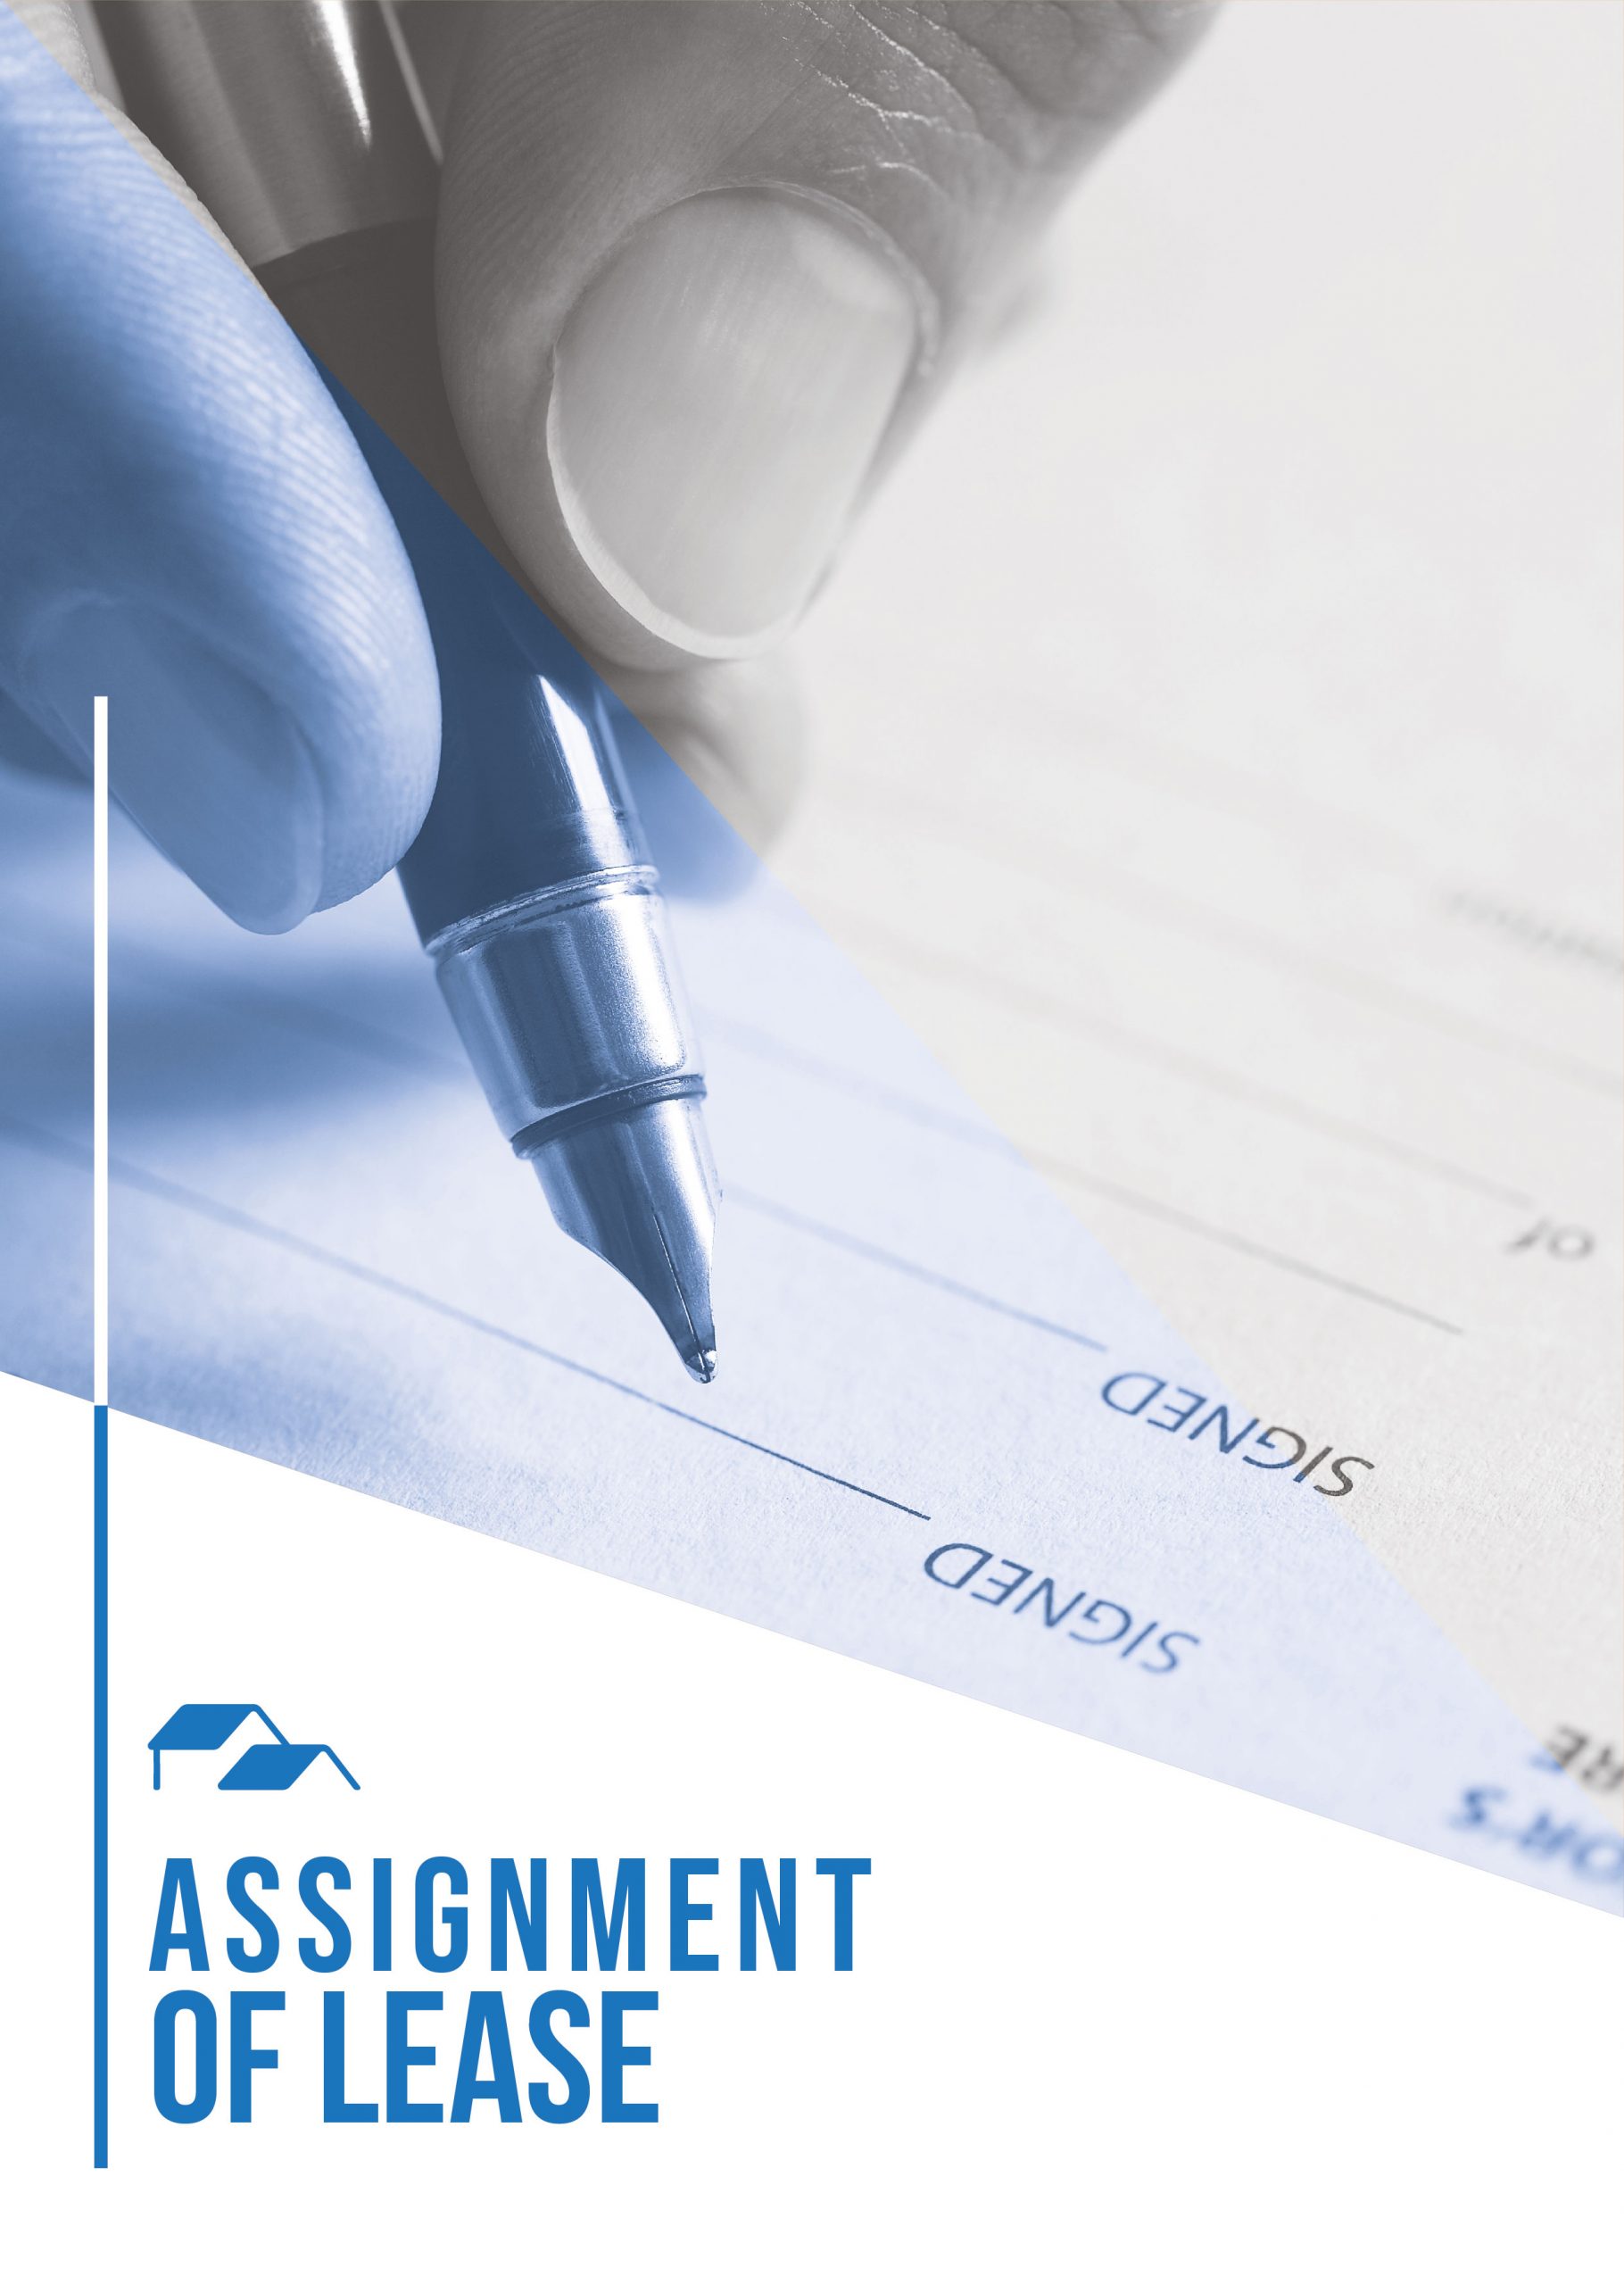 does assignment of lease mean